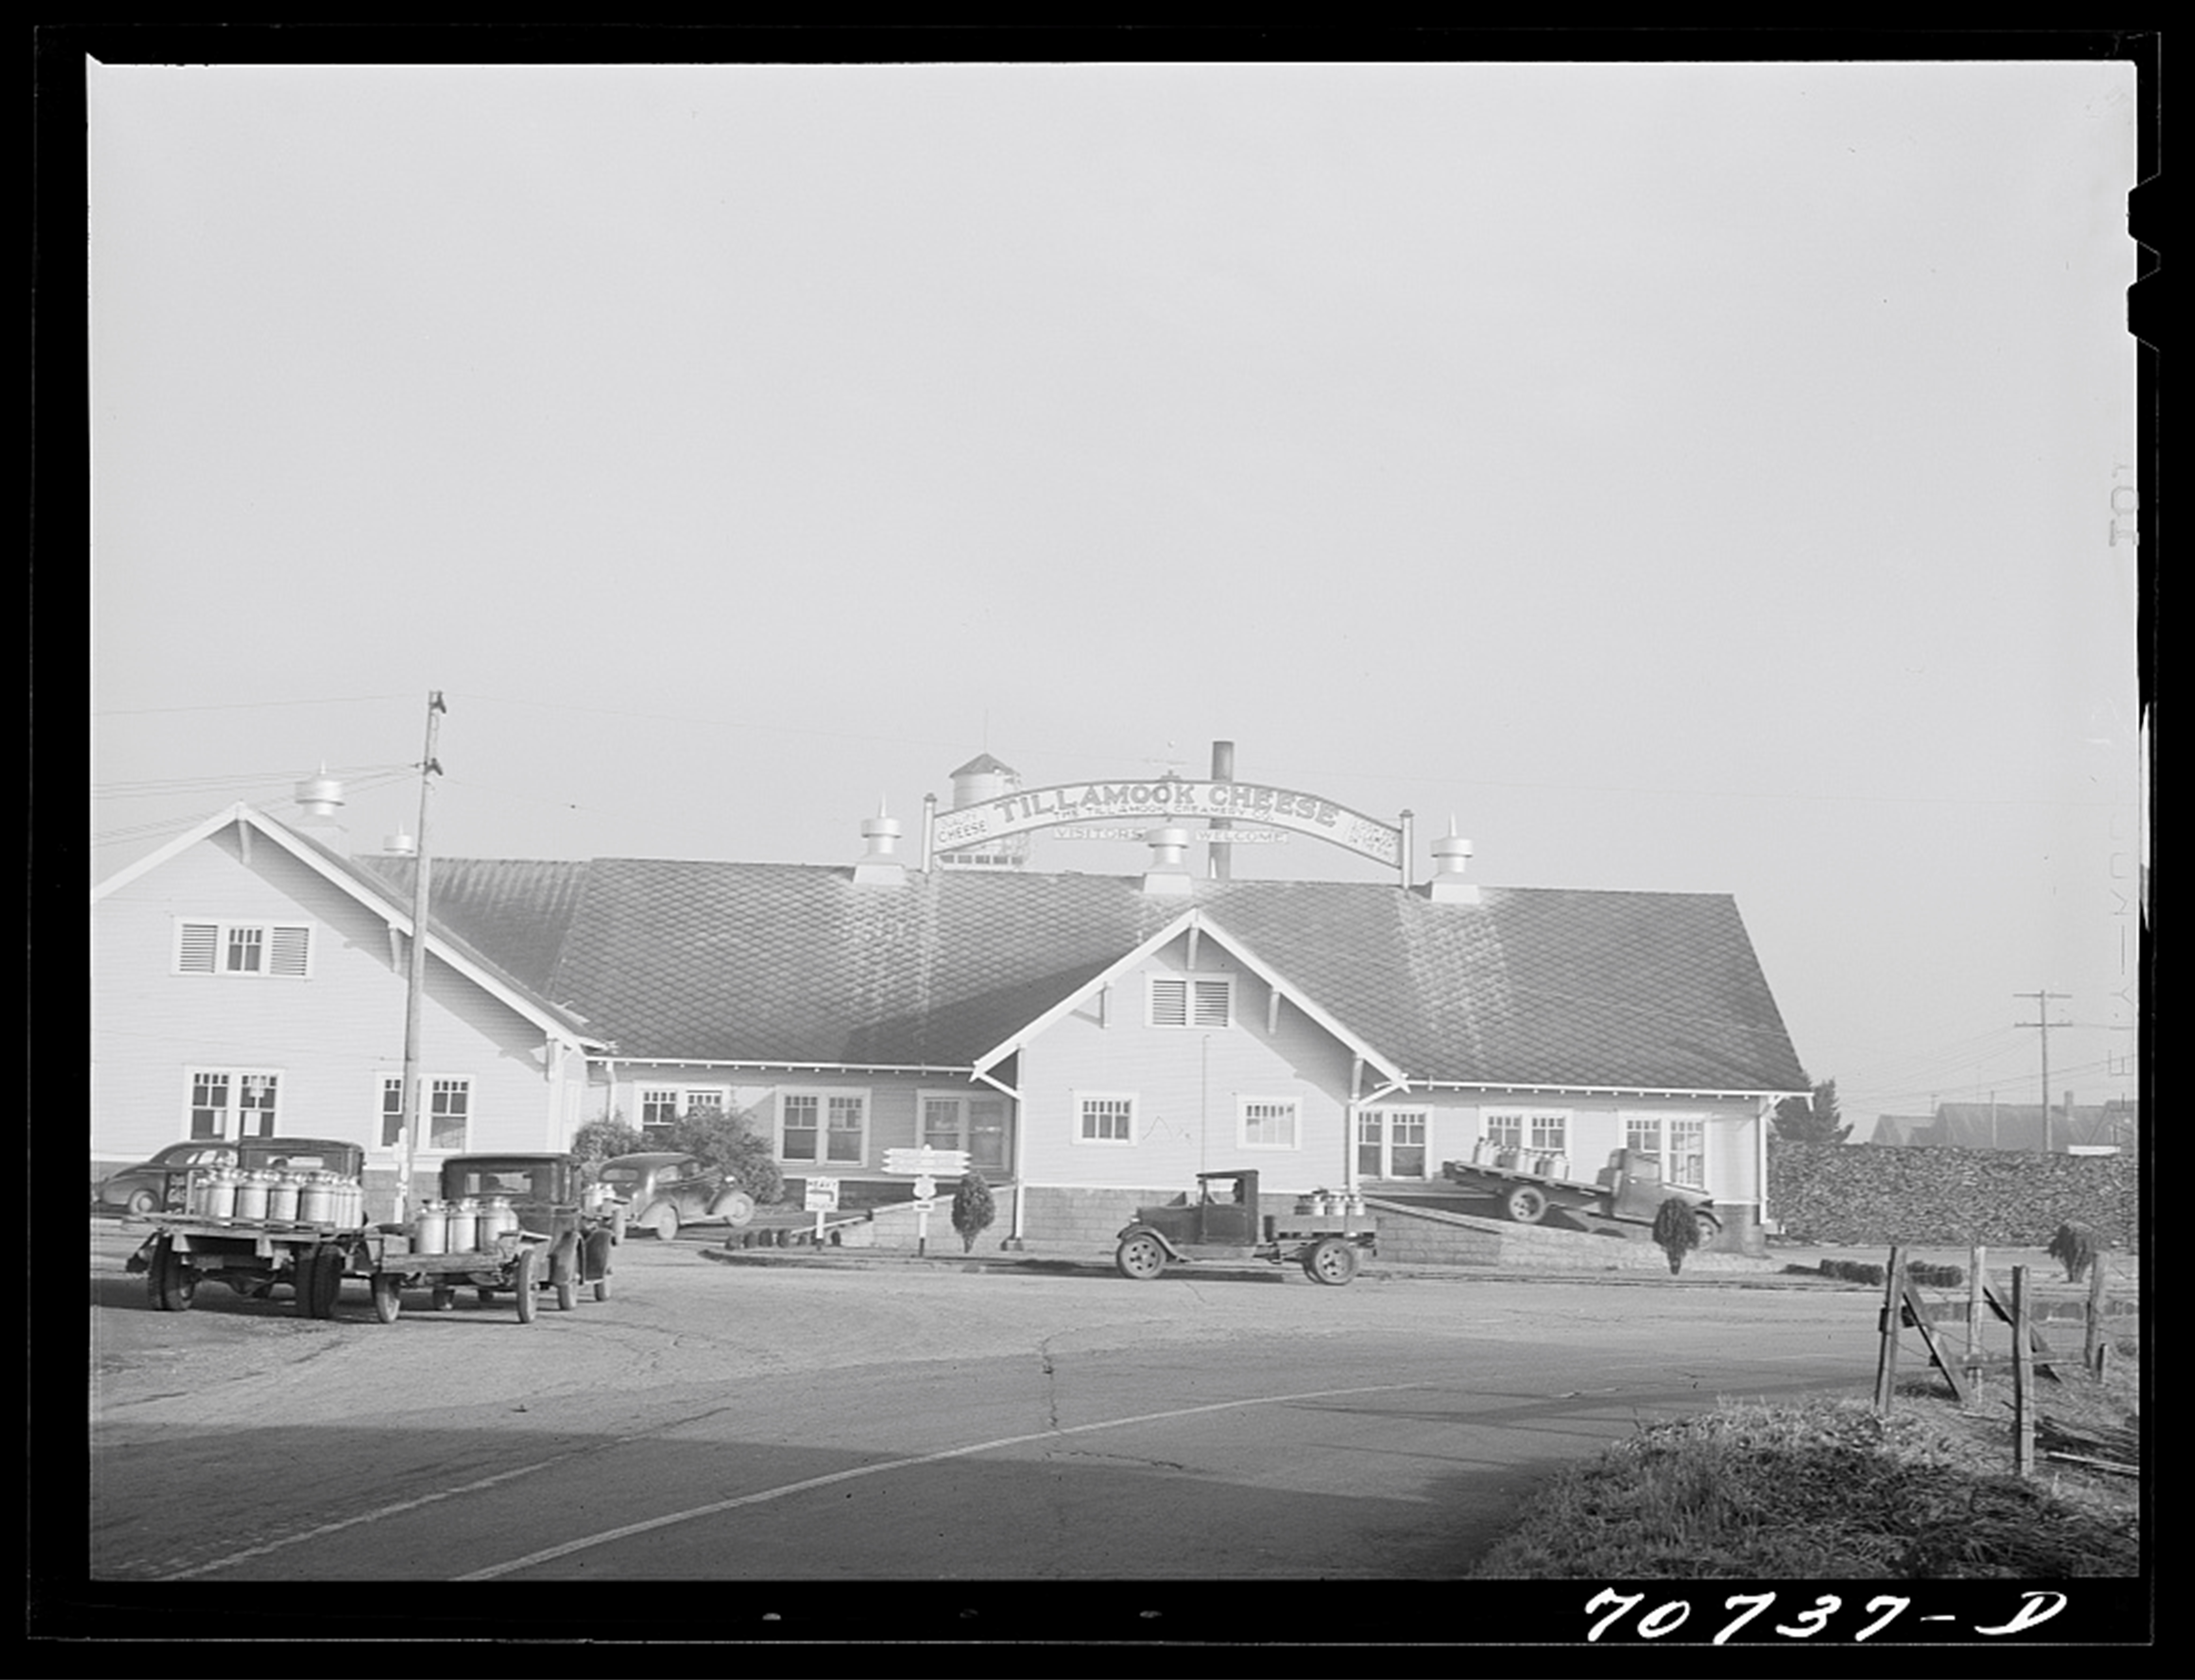 1941 photograph, outside of Tillamook Cheese plant. Several trucks loading with dairy containers.